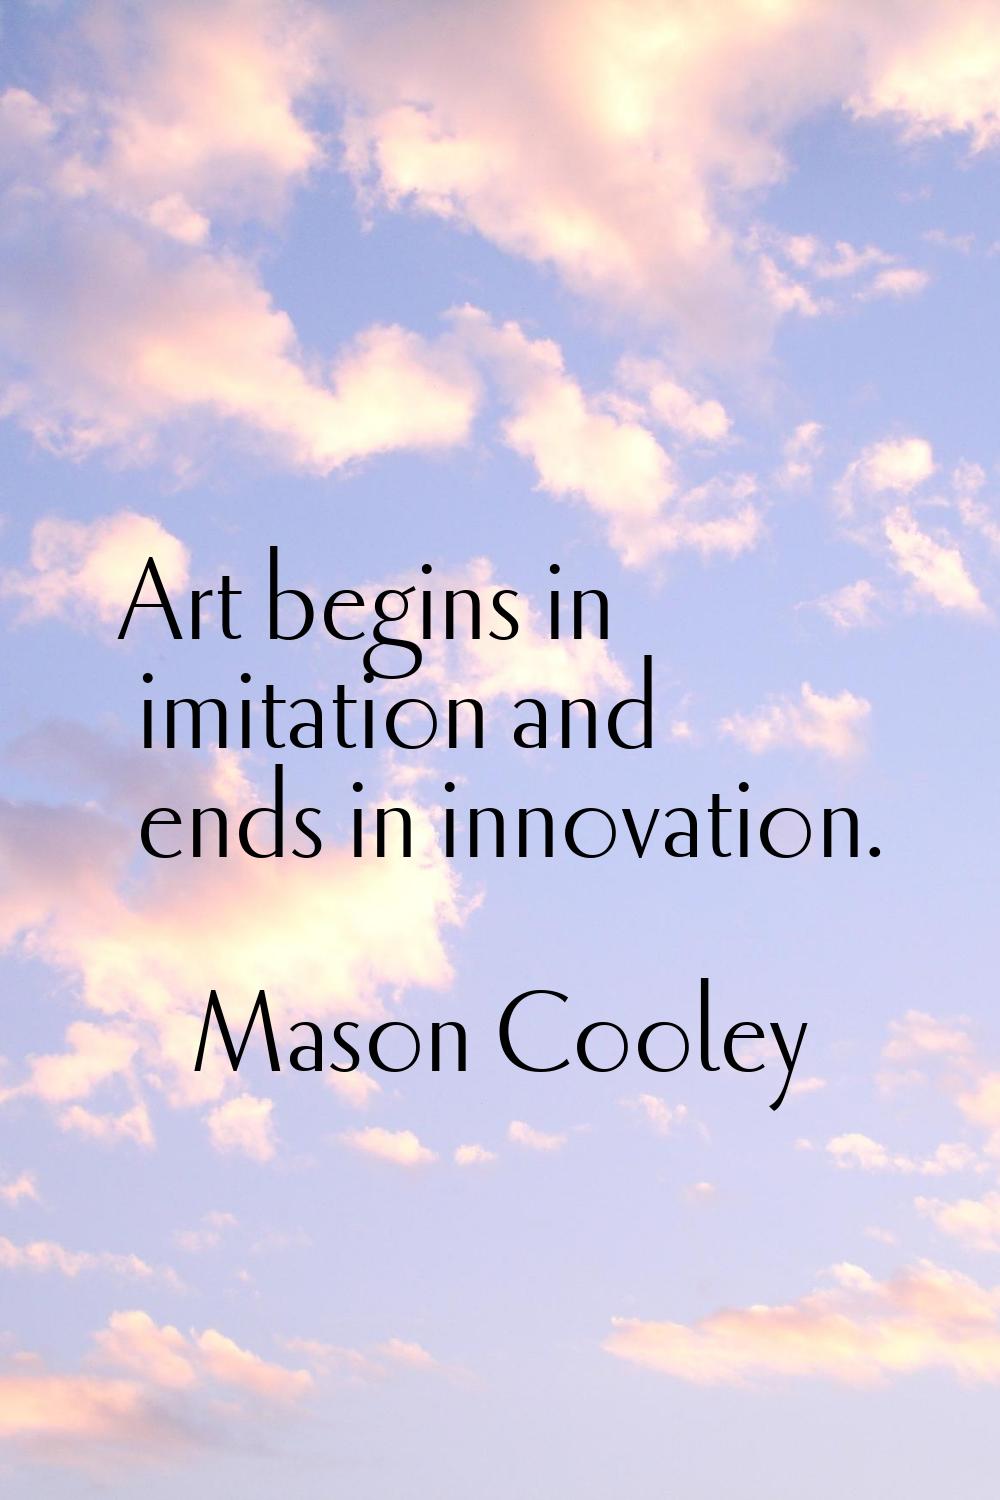 Art begins in imitation and ends in innovation.